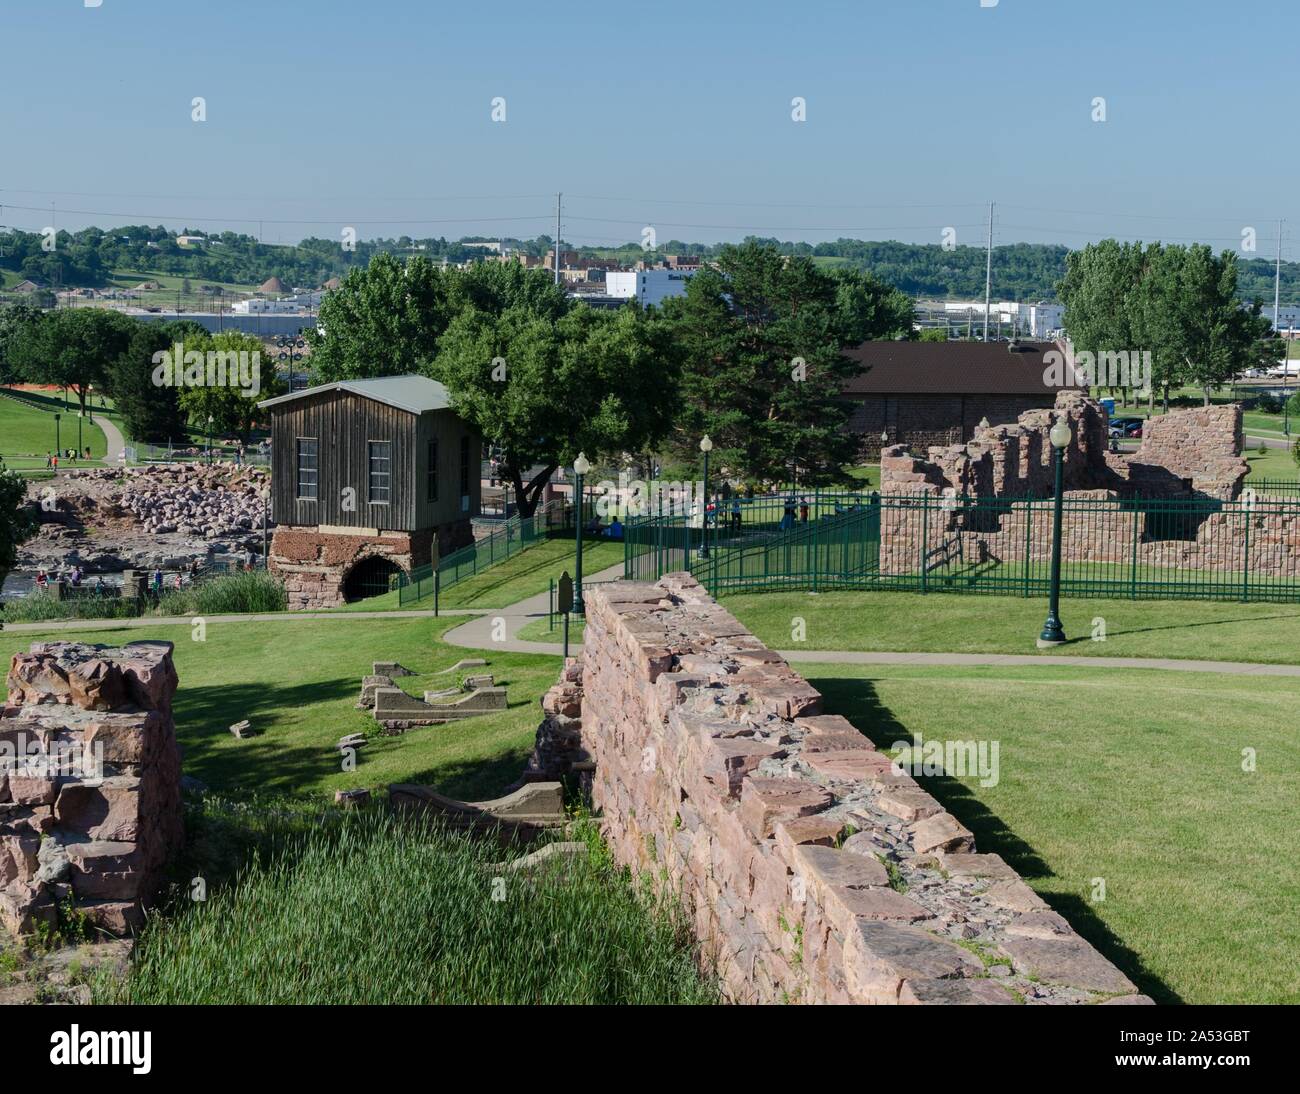 Part of the historic remains at Falls Park in Sioux Falls South Dakota, USA. Notice the supports for water pipes embedded in the ground. Stock Photo